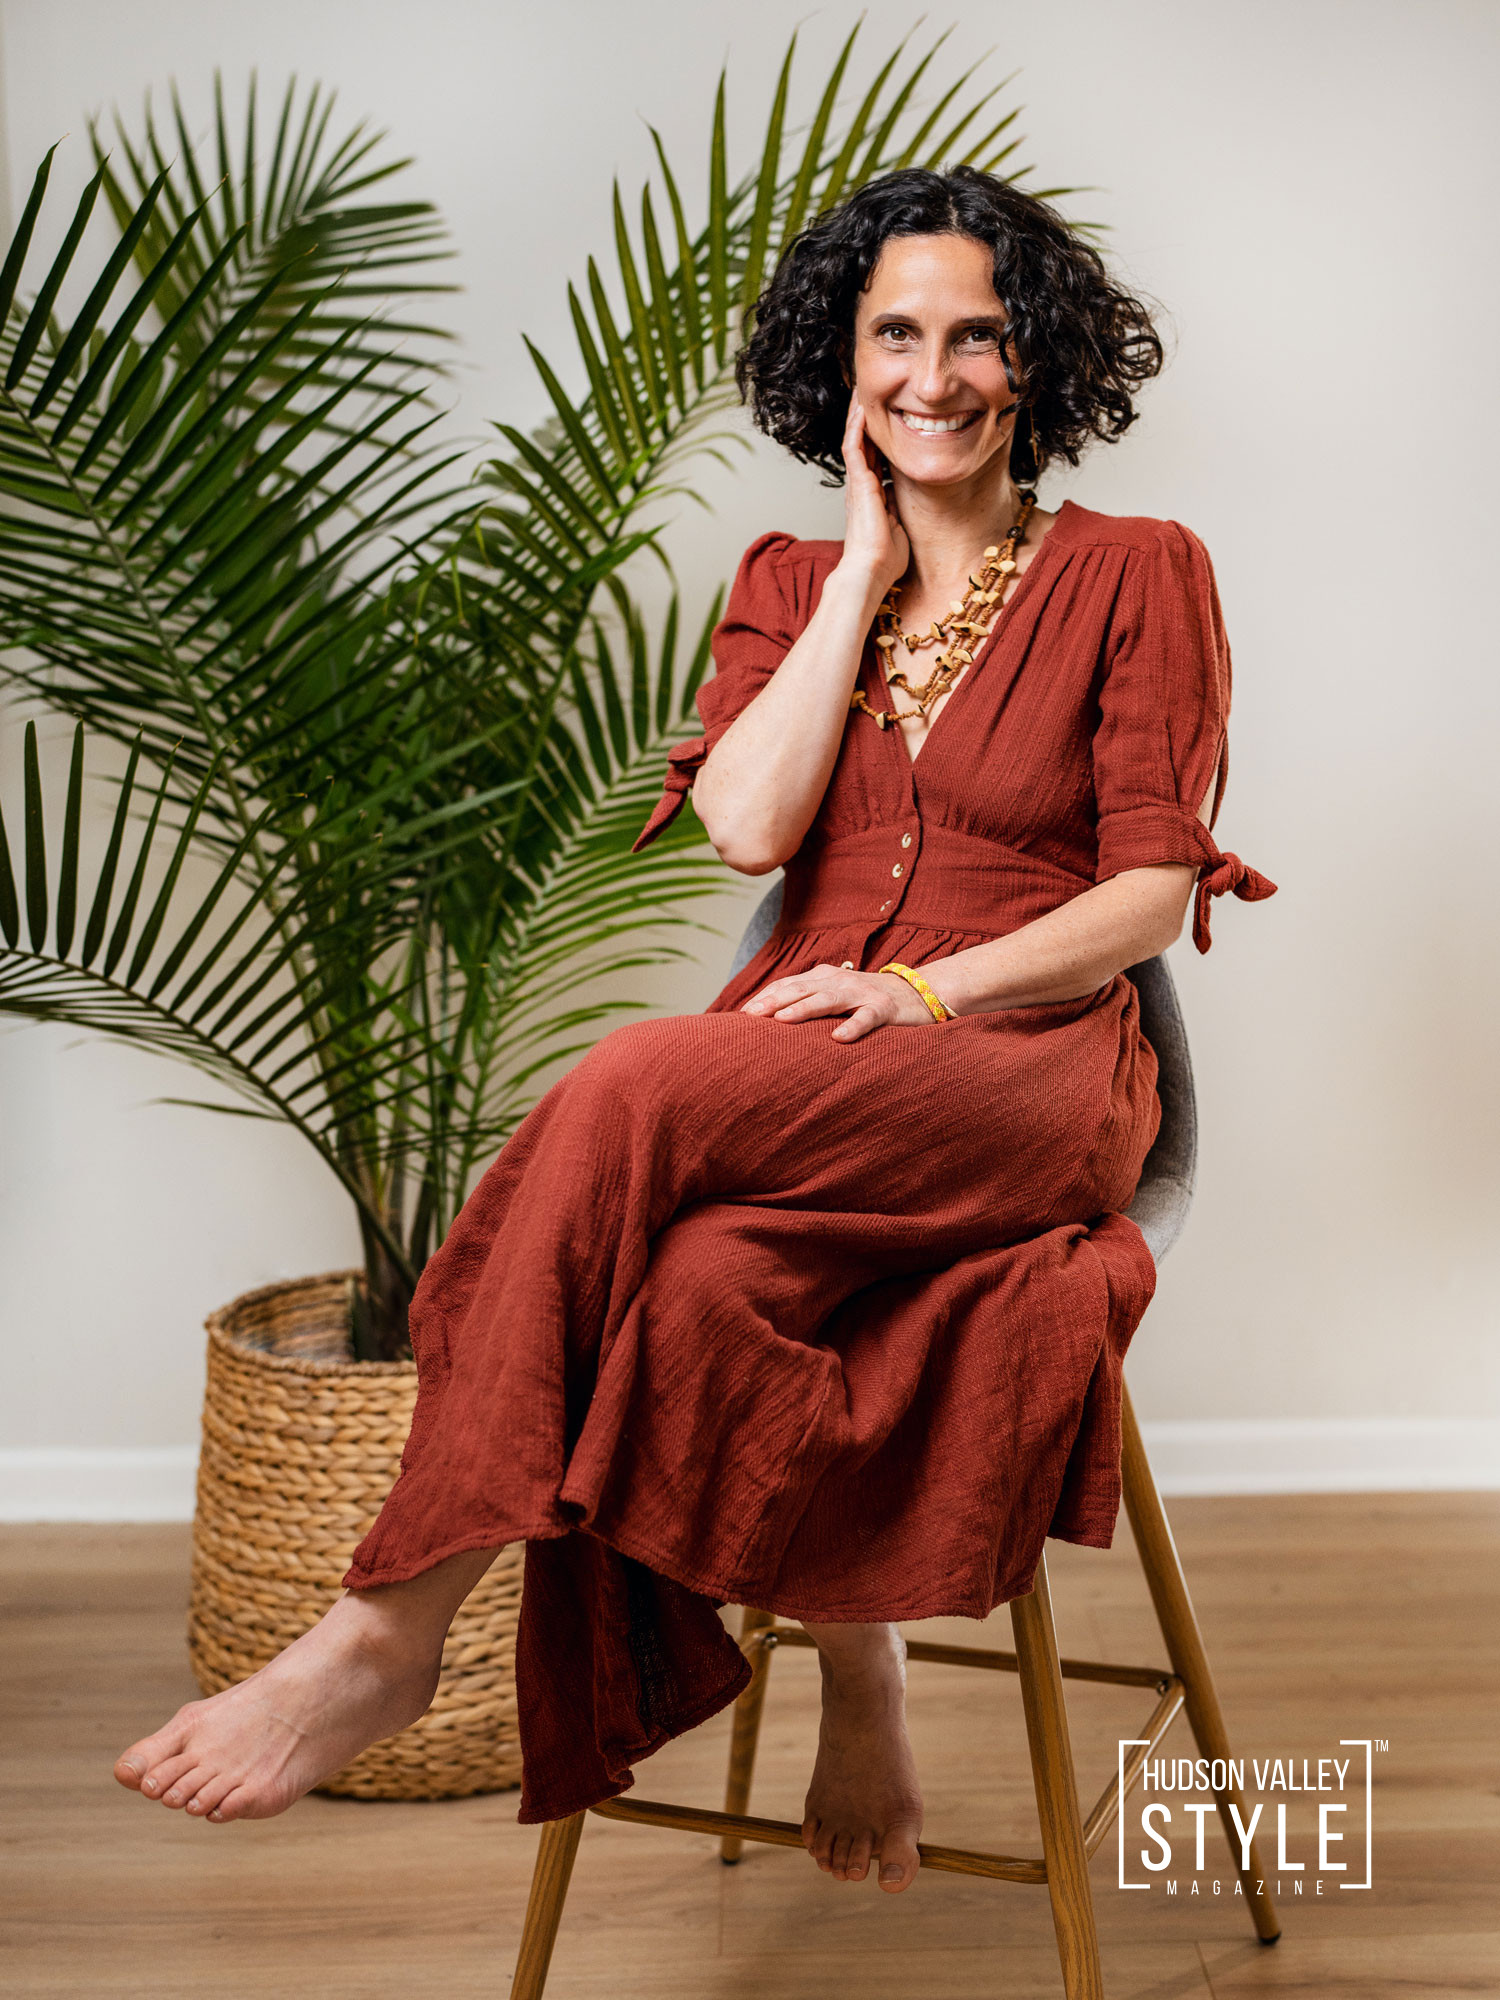 The Sunset Healing Collective in New Paltz, NY: Where Holistic Health Meets Spiritual Powerhouses Like Alison Debra Sinatra – Presented by Sunset Healing Collective